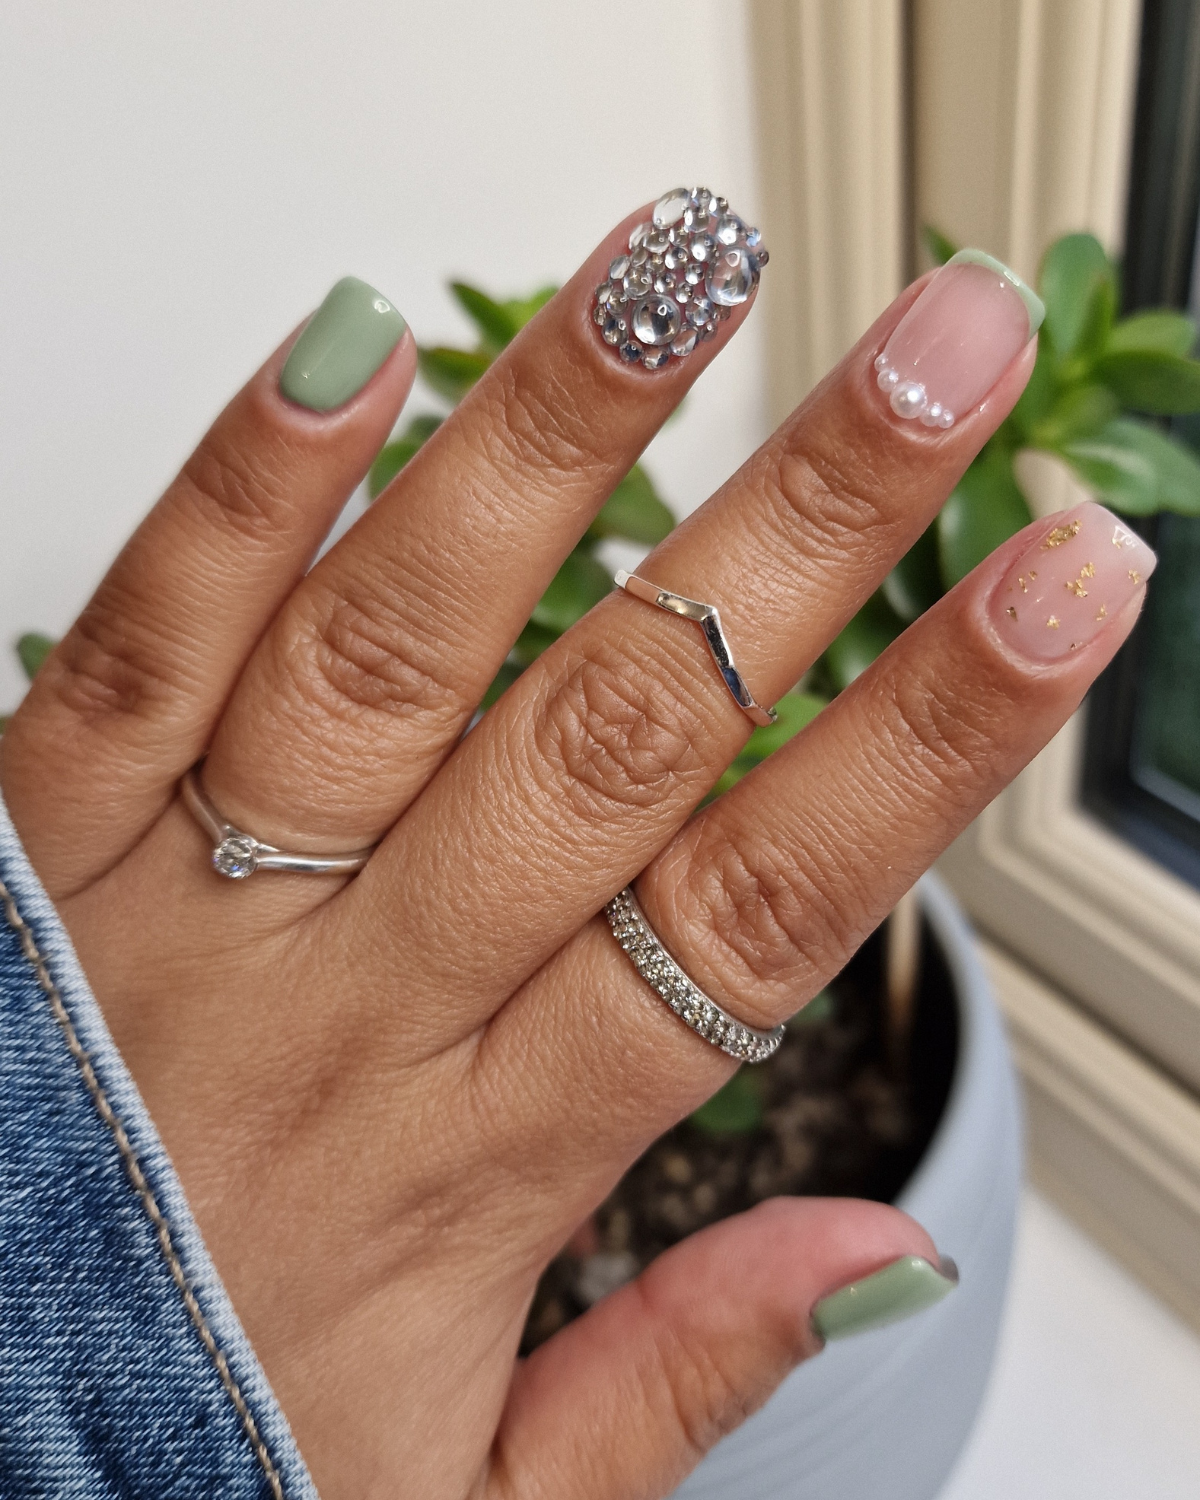 33 Gel Nail Designs That You Will Want to Copy Immediately